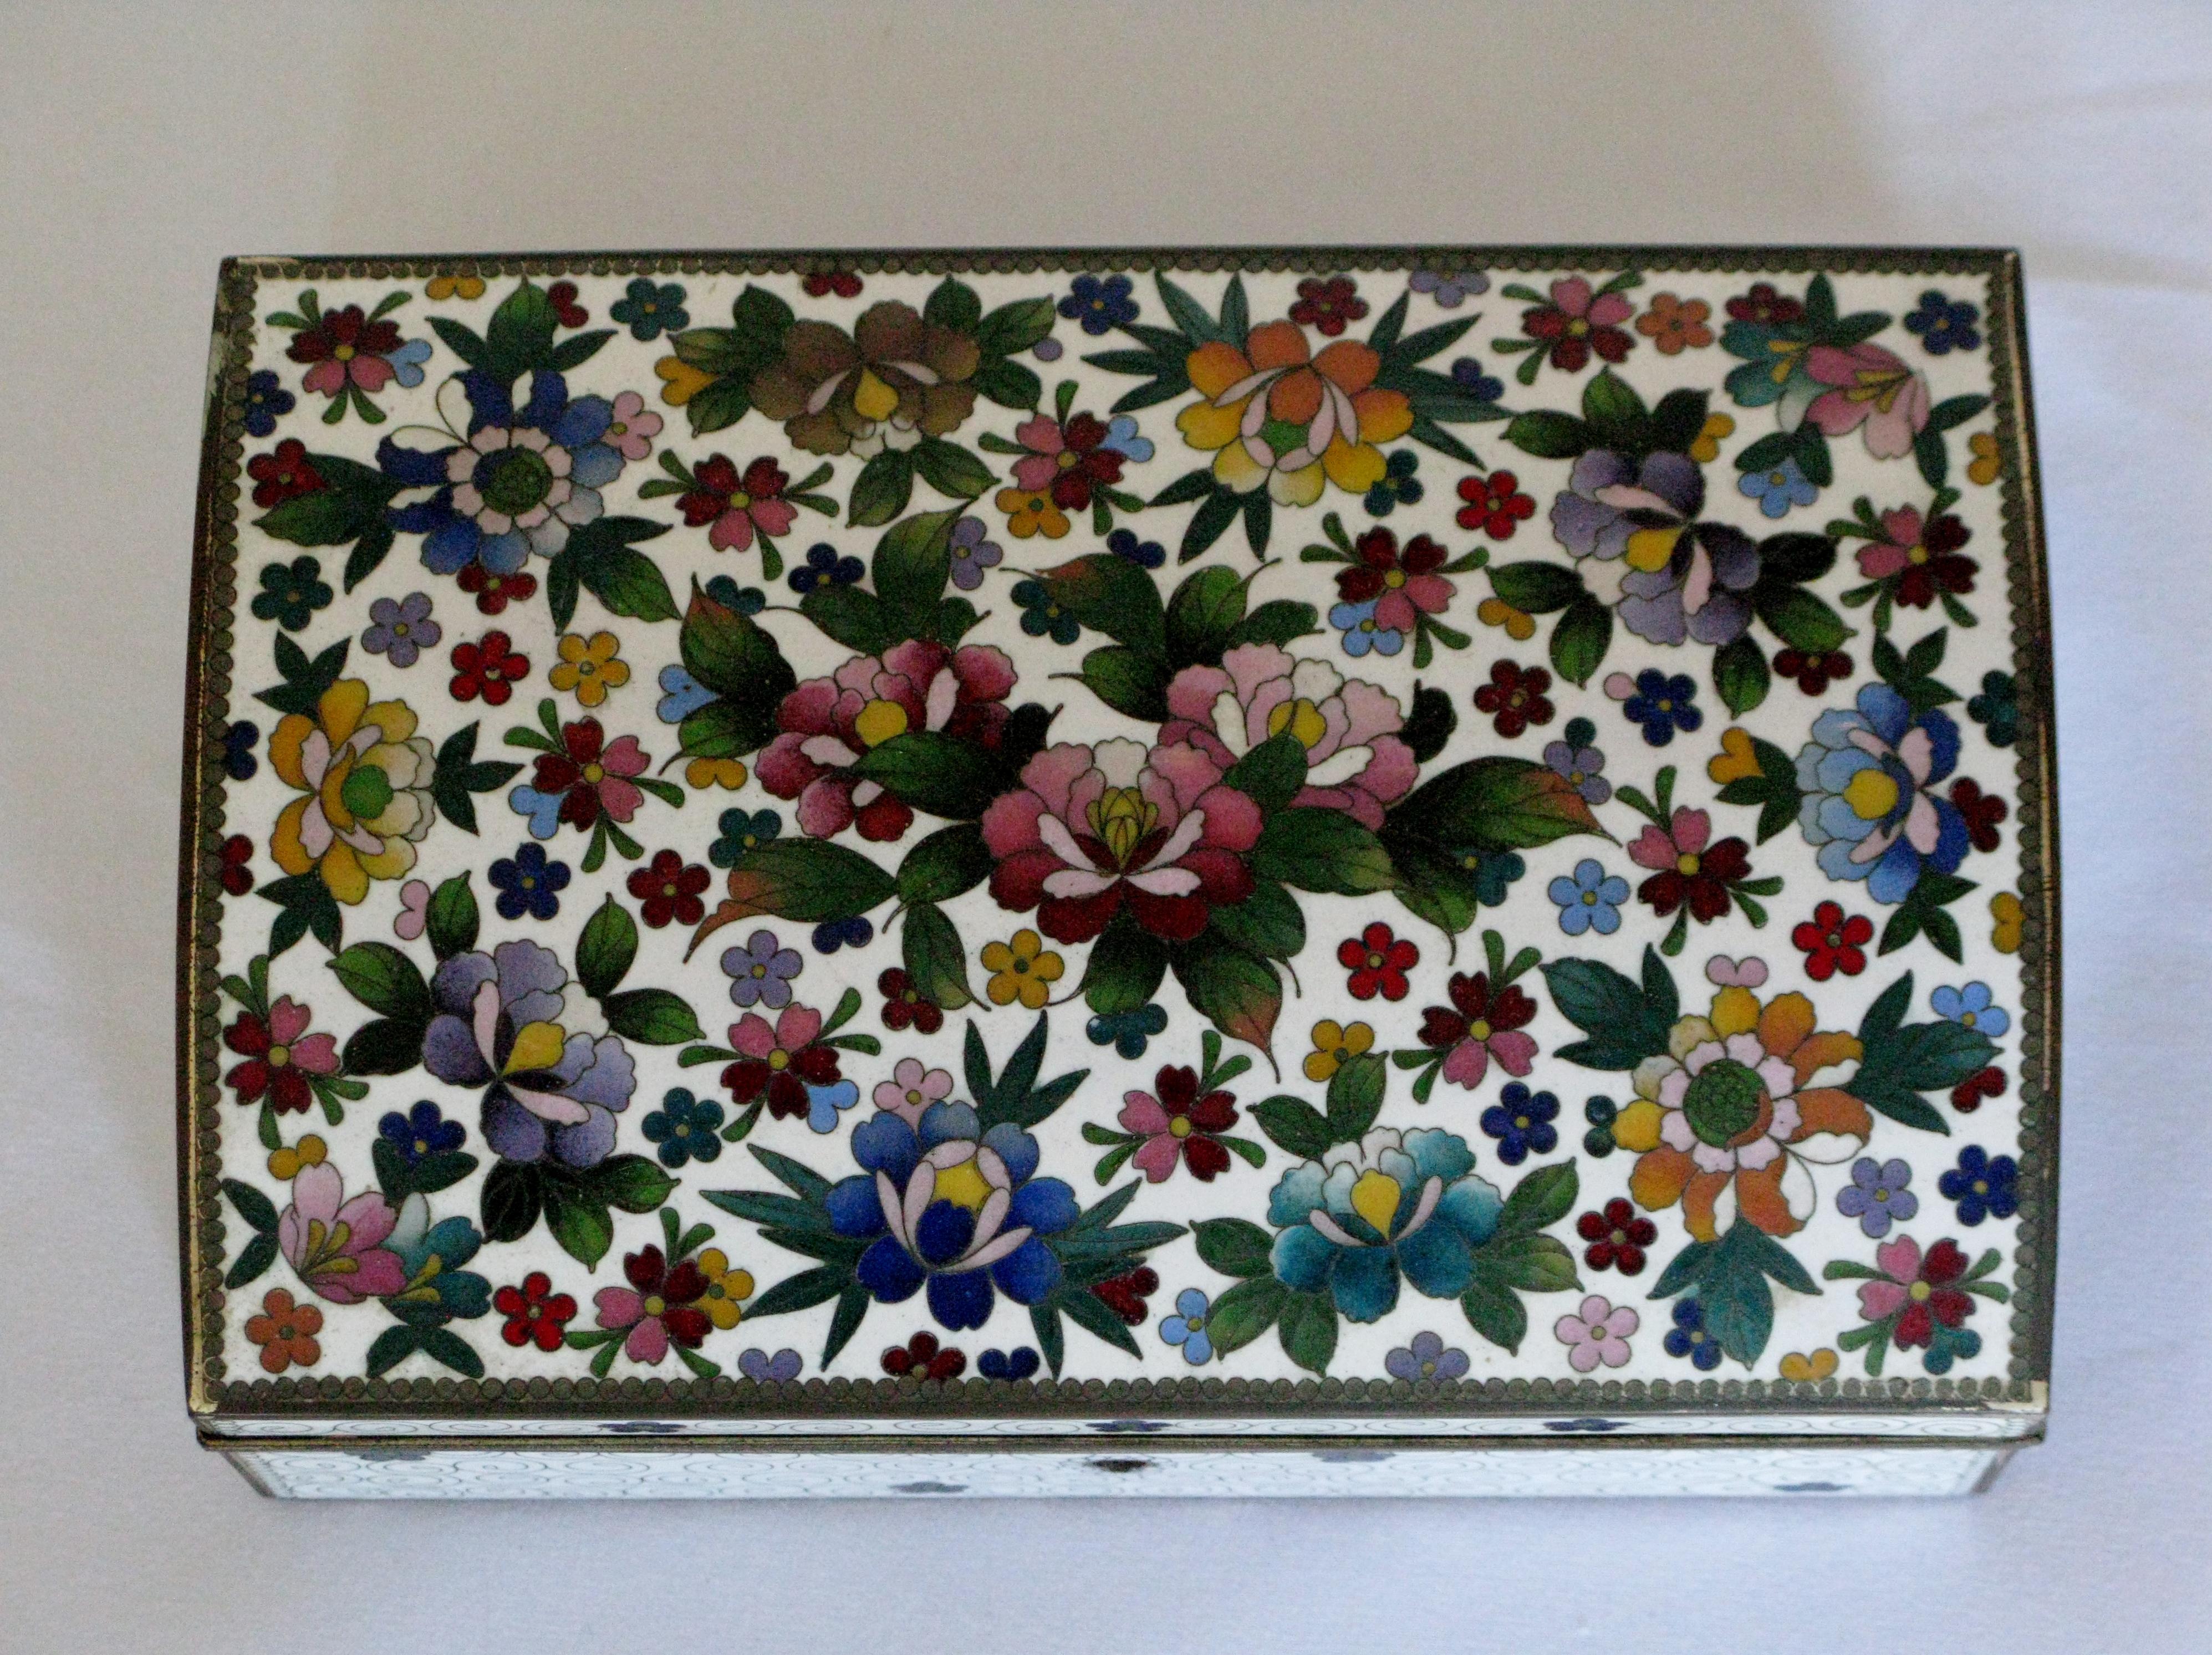 Very rare Japanese cloisonné jewelry box, circa 1960s.
 Rich floral design top on white enamel background. Garnet velvet interior , with tray. 
Brass keyhole, key not present.
The box was created for and given as a presentation gift or award for